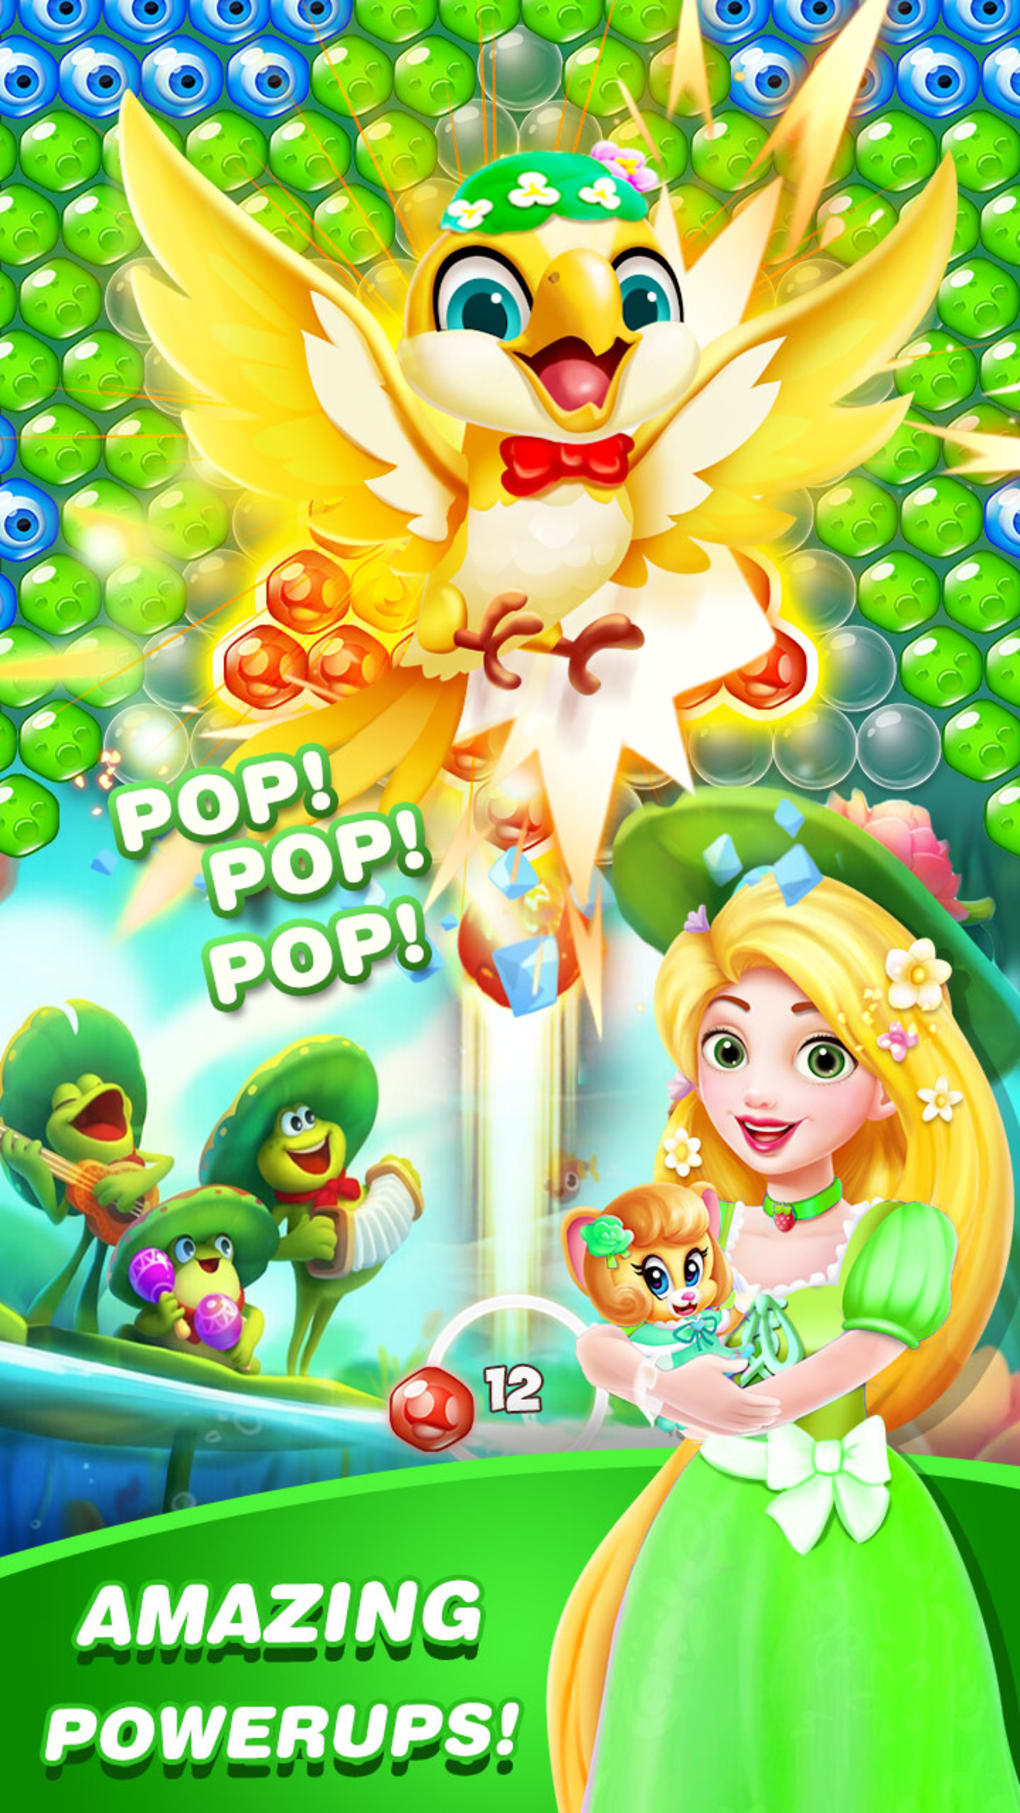 Bubble Shooter HD 2 🔥 Play online